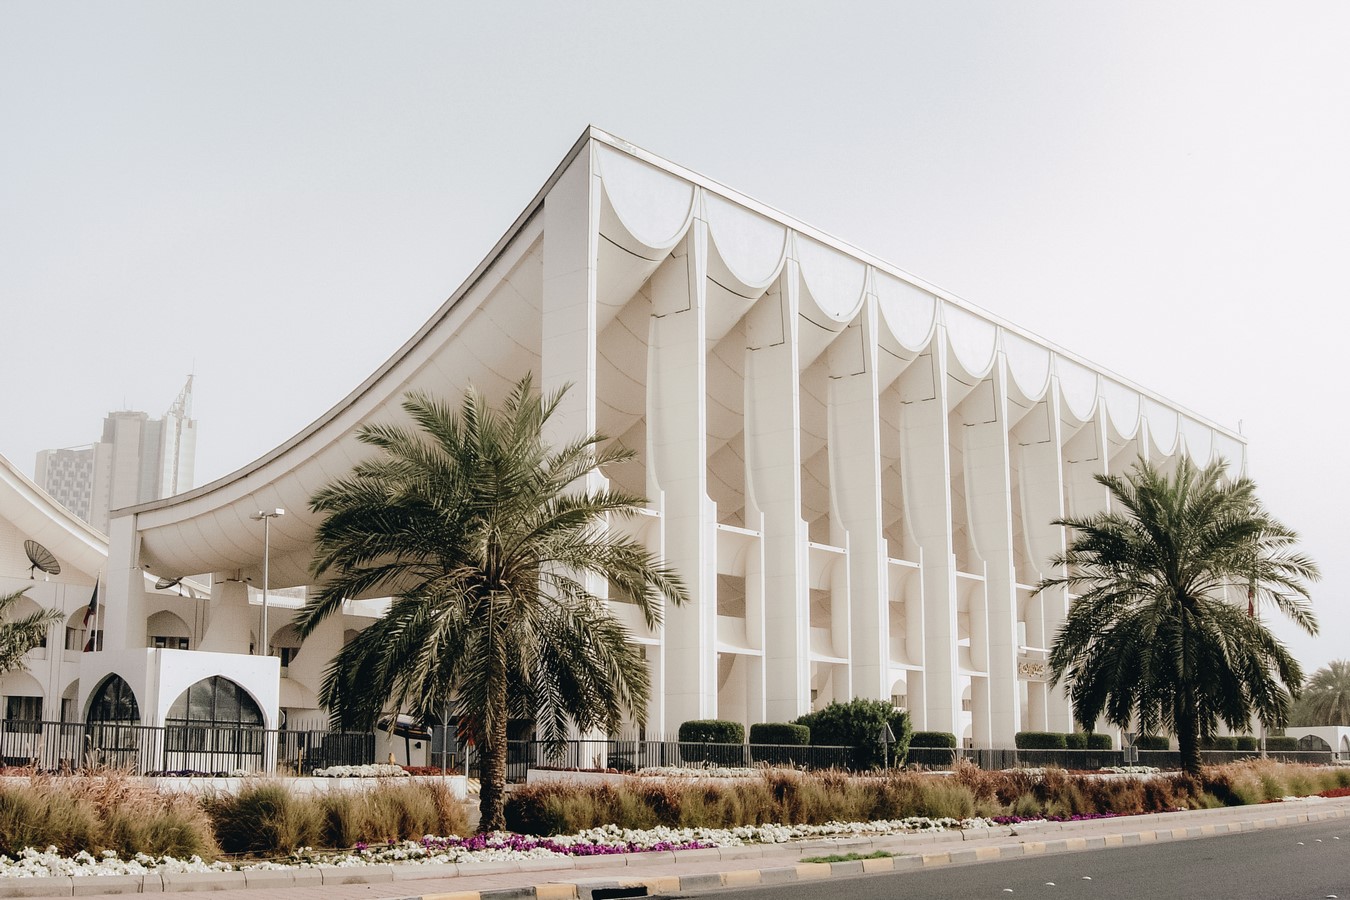 Kuwait National Assembly Building by Jørn Utzon: Architecture inspired from Bazaars - Sheet2